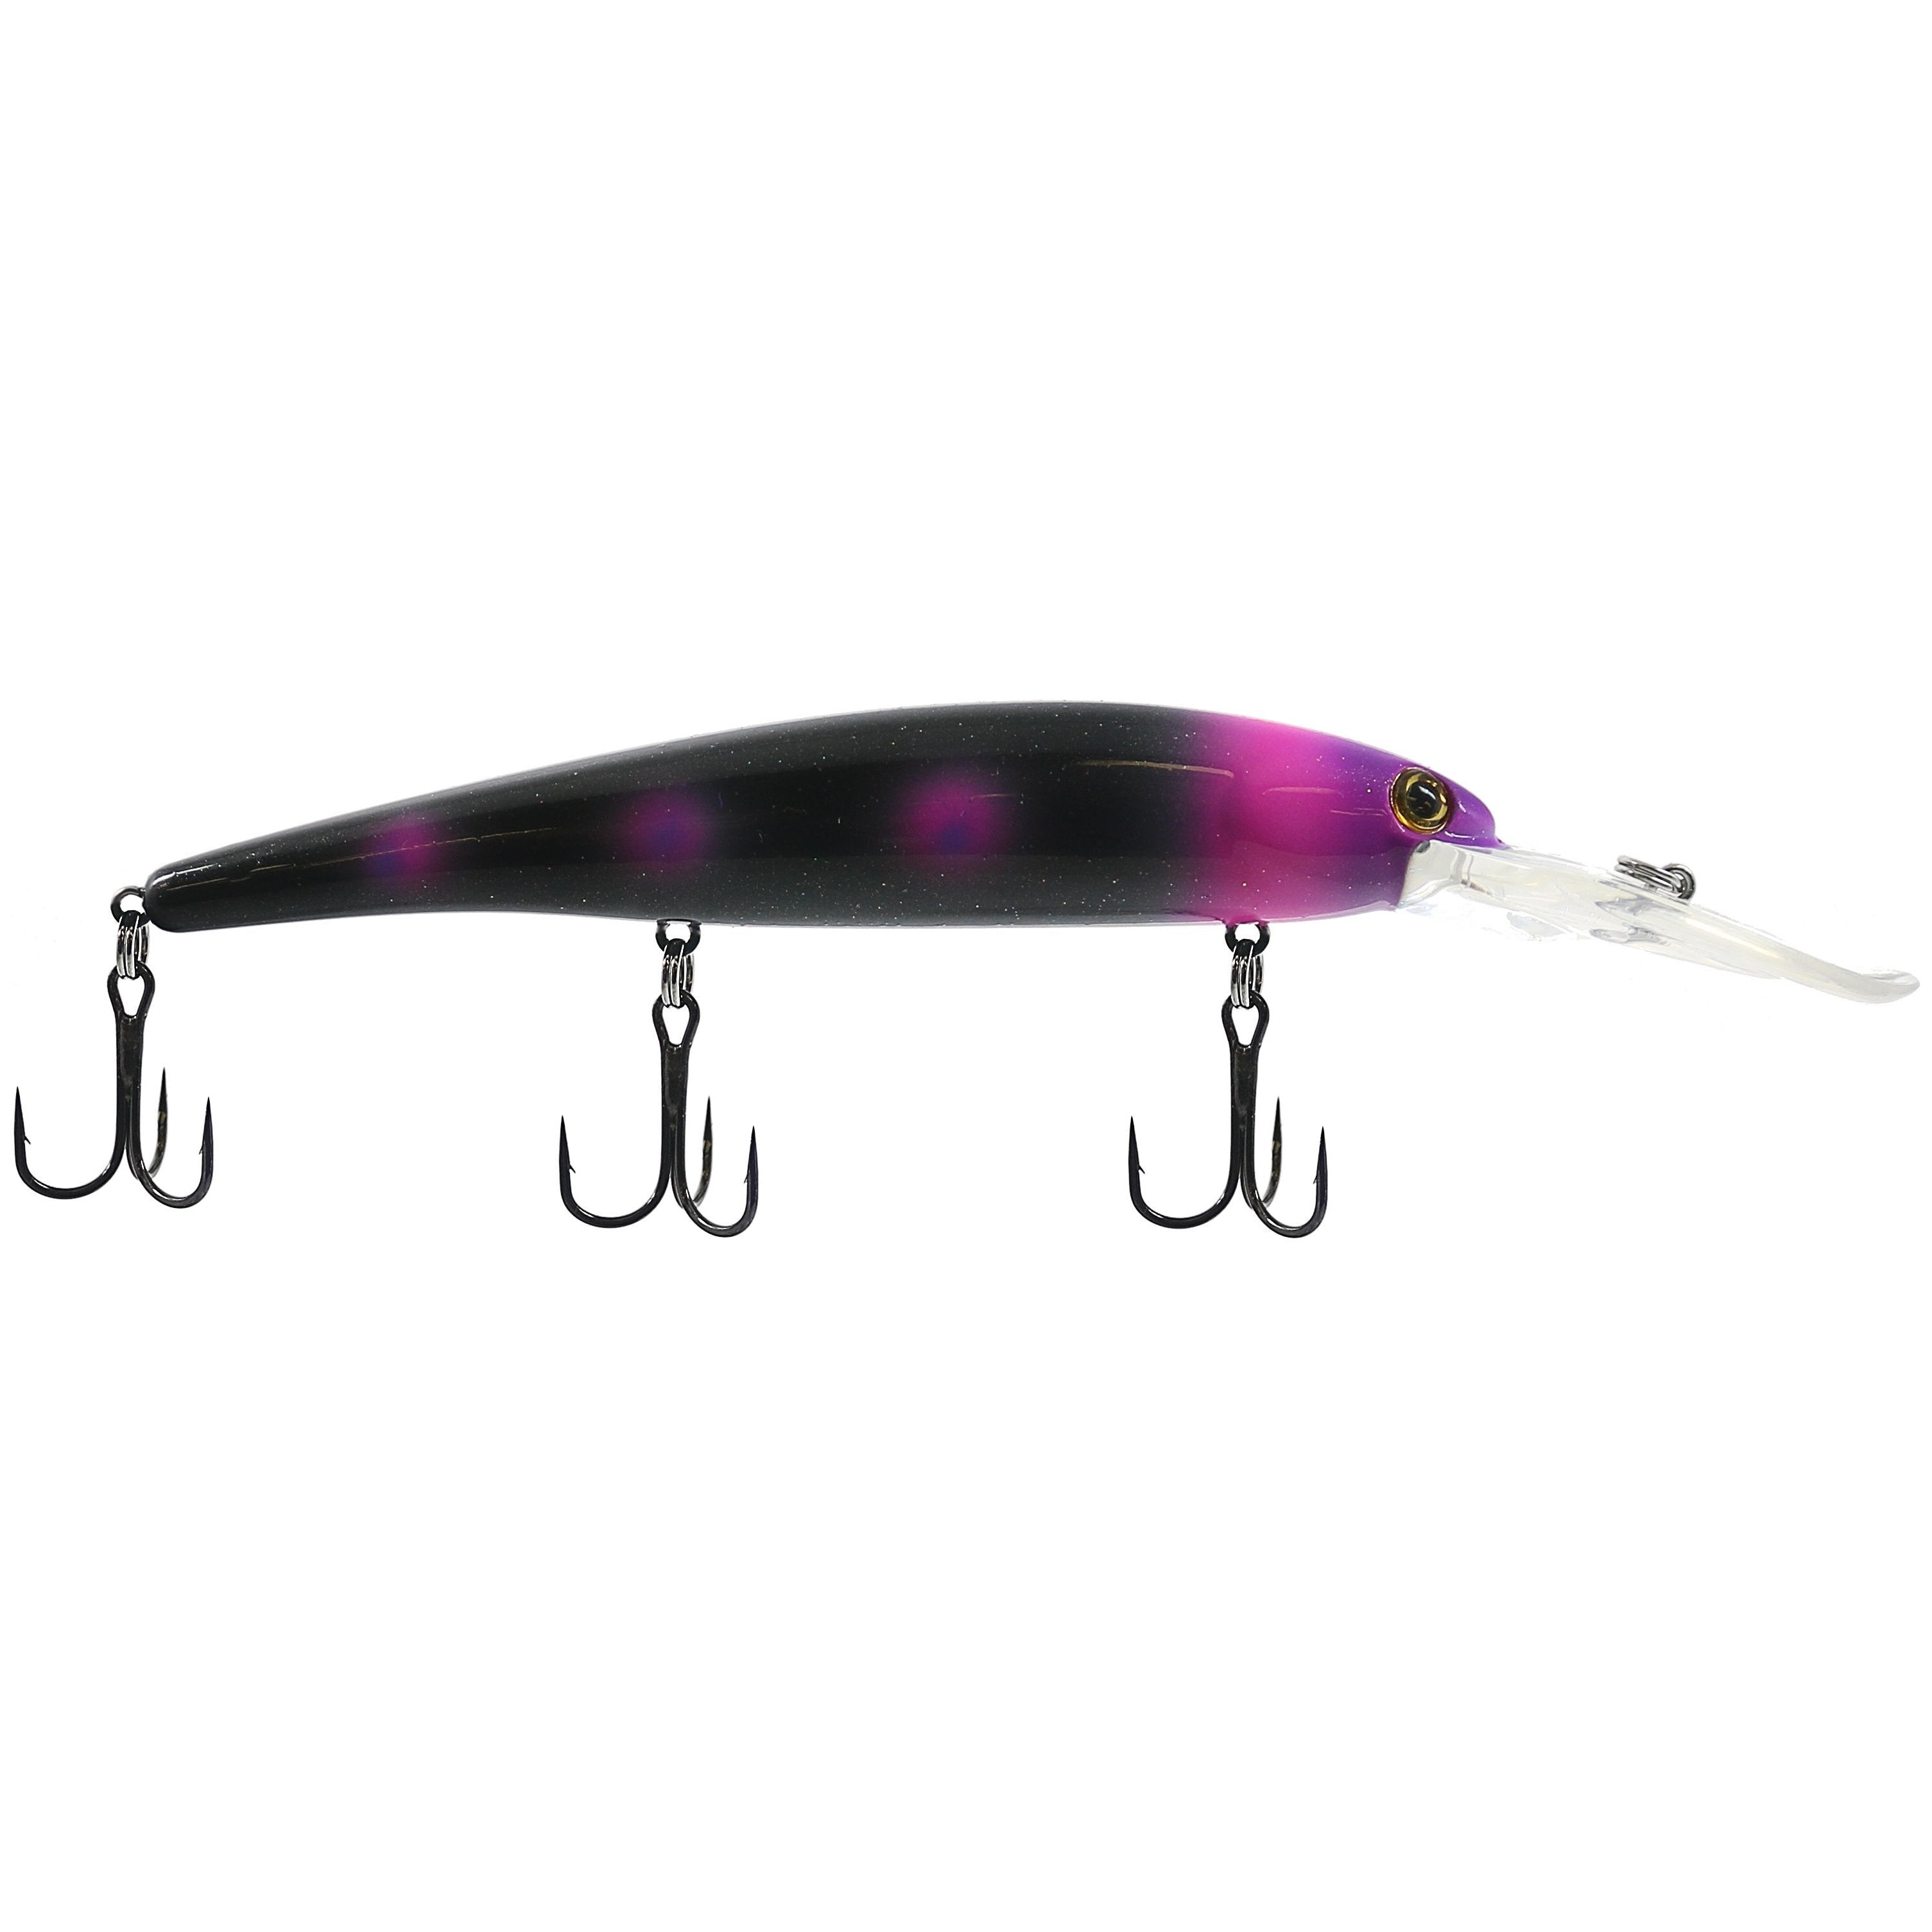 Bandit 300 Real Crappie - Lurenet Paint Shop (Custom Painted Lures)